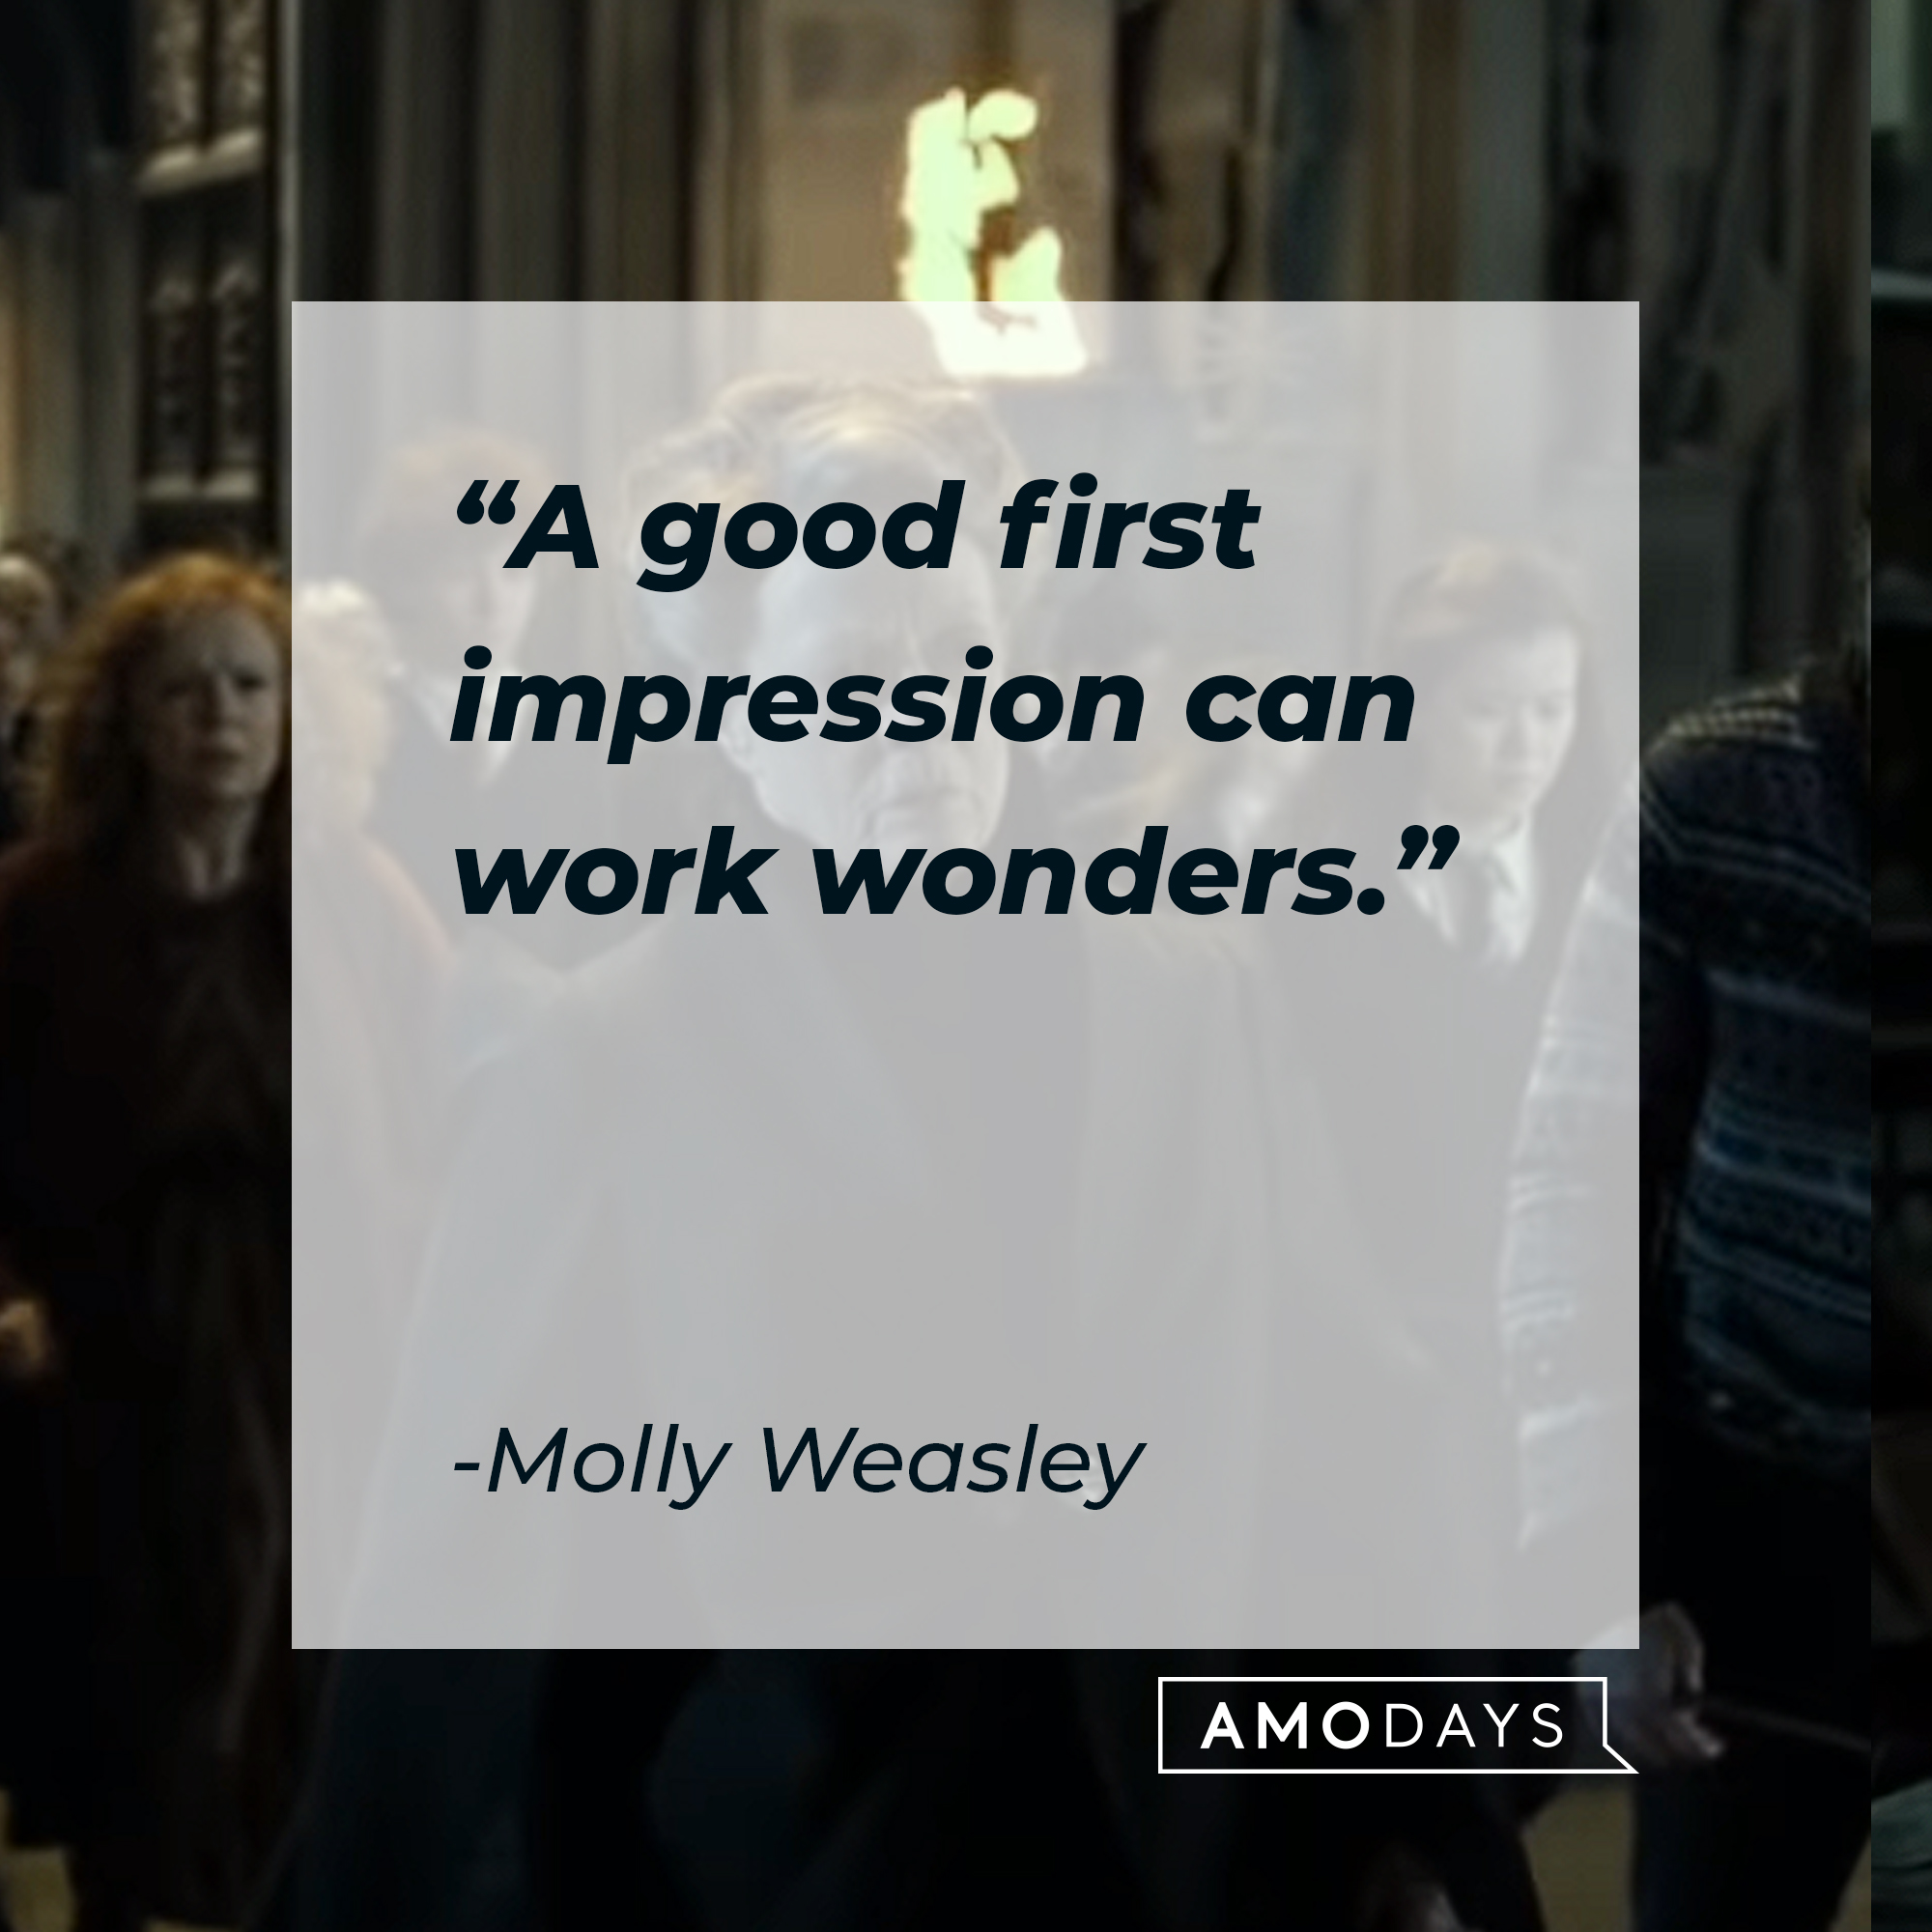 Molly Weasley's quote: "A good first impression can work wonders." | Source: Youtube.com/harrypotter